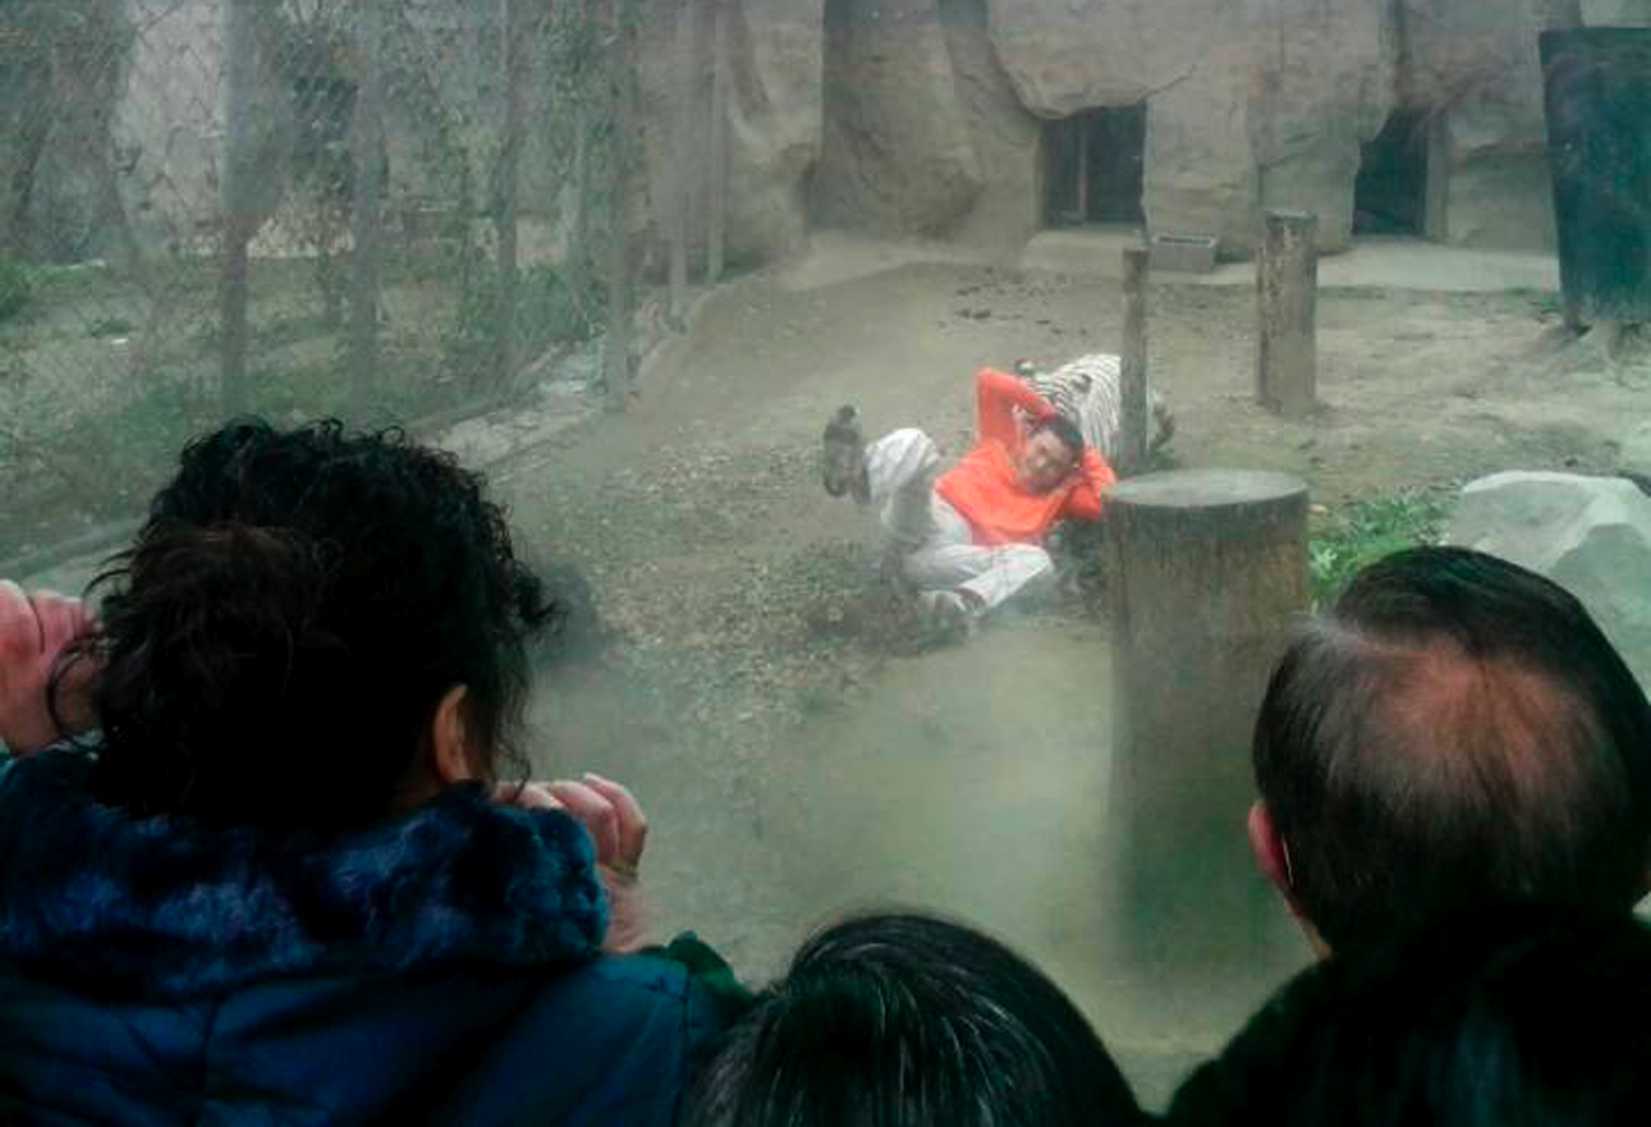 A female Bengali white tiger drags a man by his shirt after the man climbed into the enclosure, at a zoo in Chengdu, Sichuan province February 16, 2014. (China Daily—Reuters)